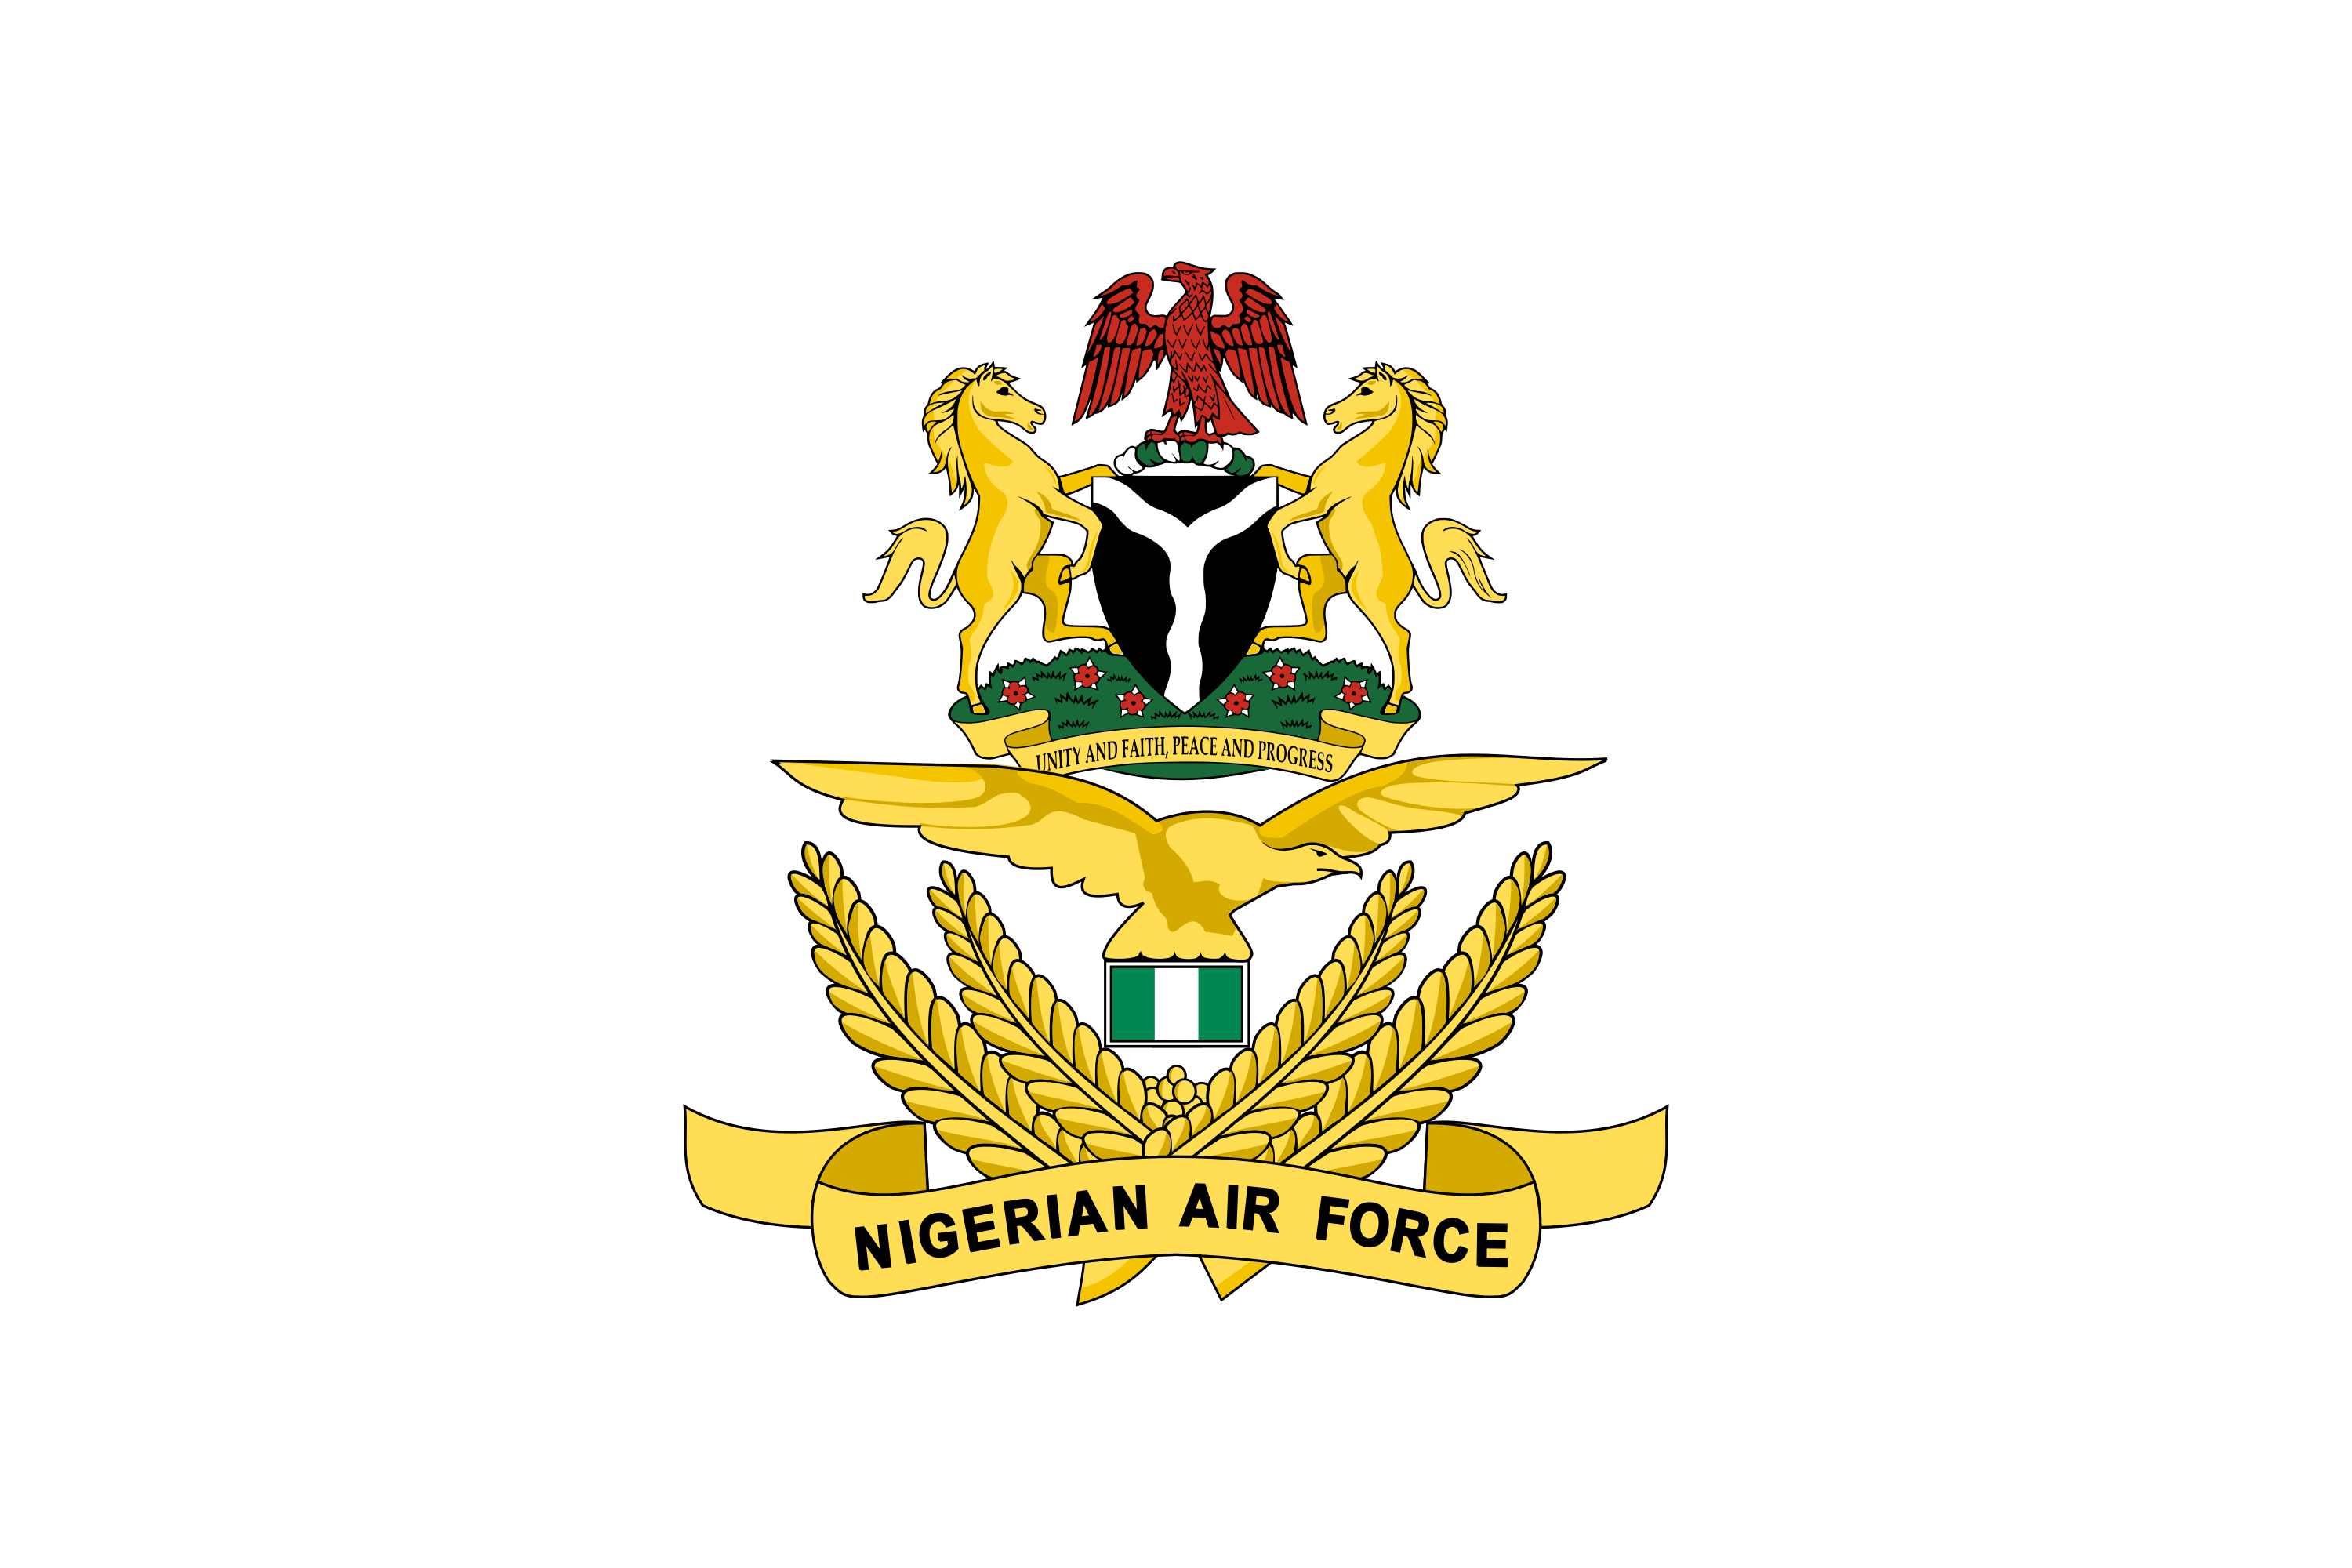 Download Nigerian Air Force Logo In Svg Vector Or Png File Format Logo Wine